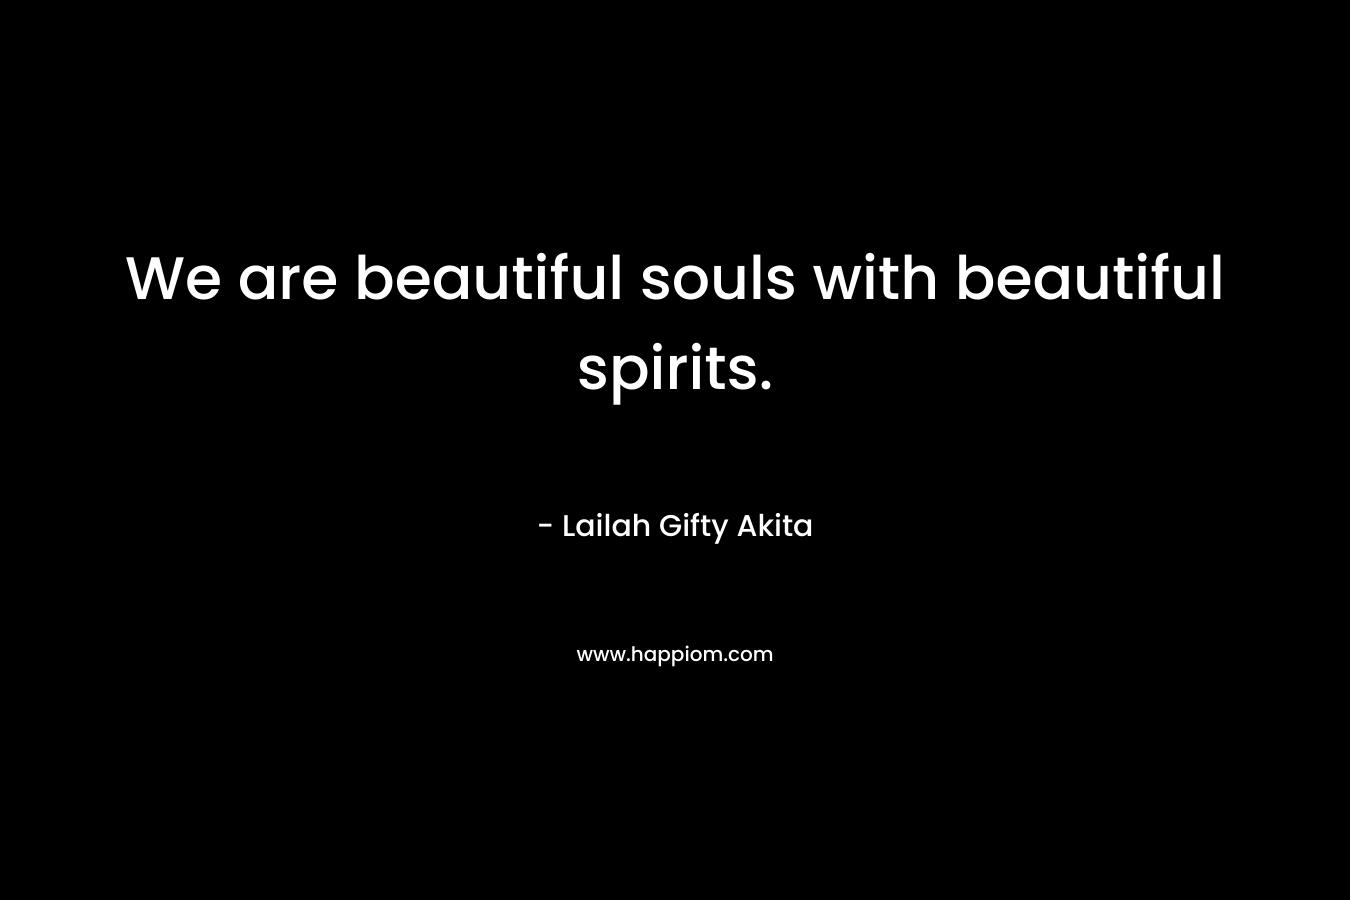 We are beautiful souls with beautiful spirits.